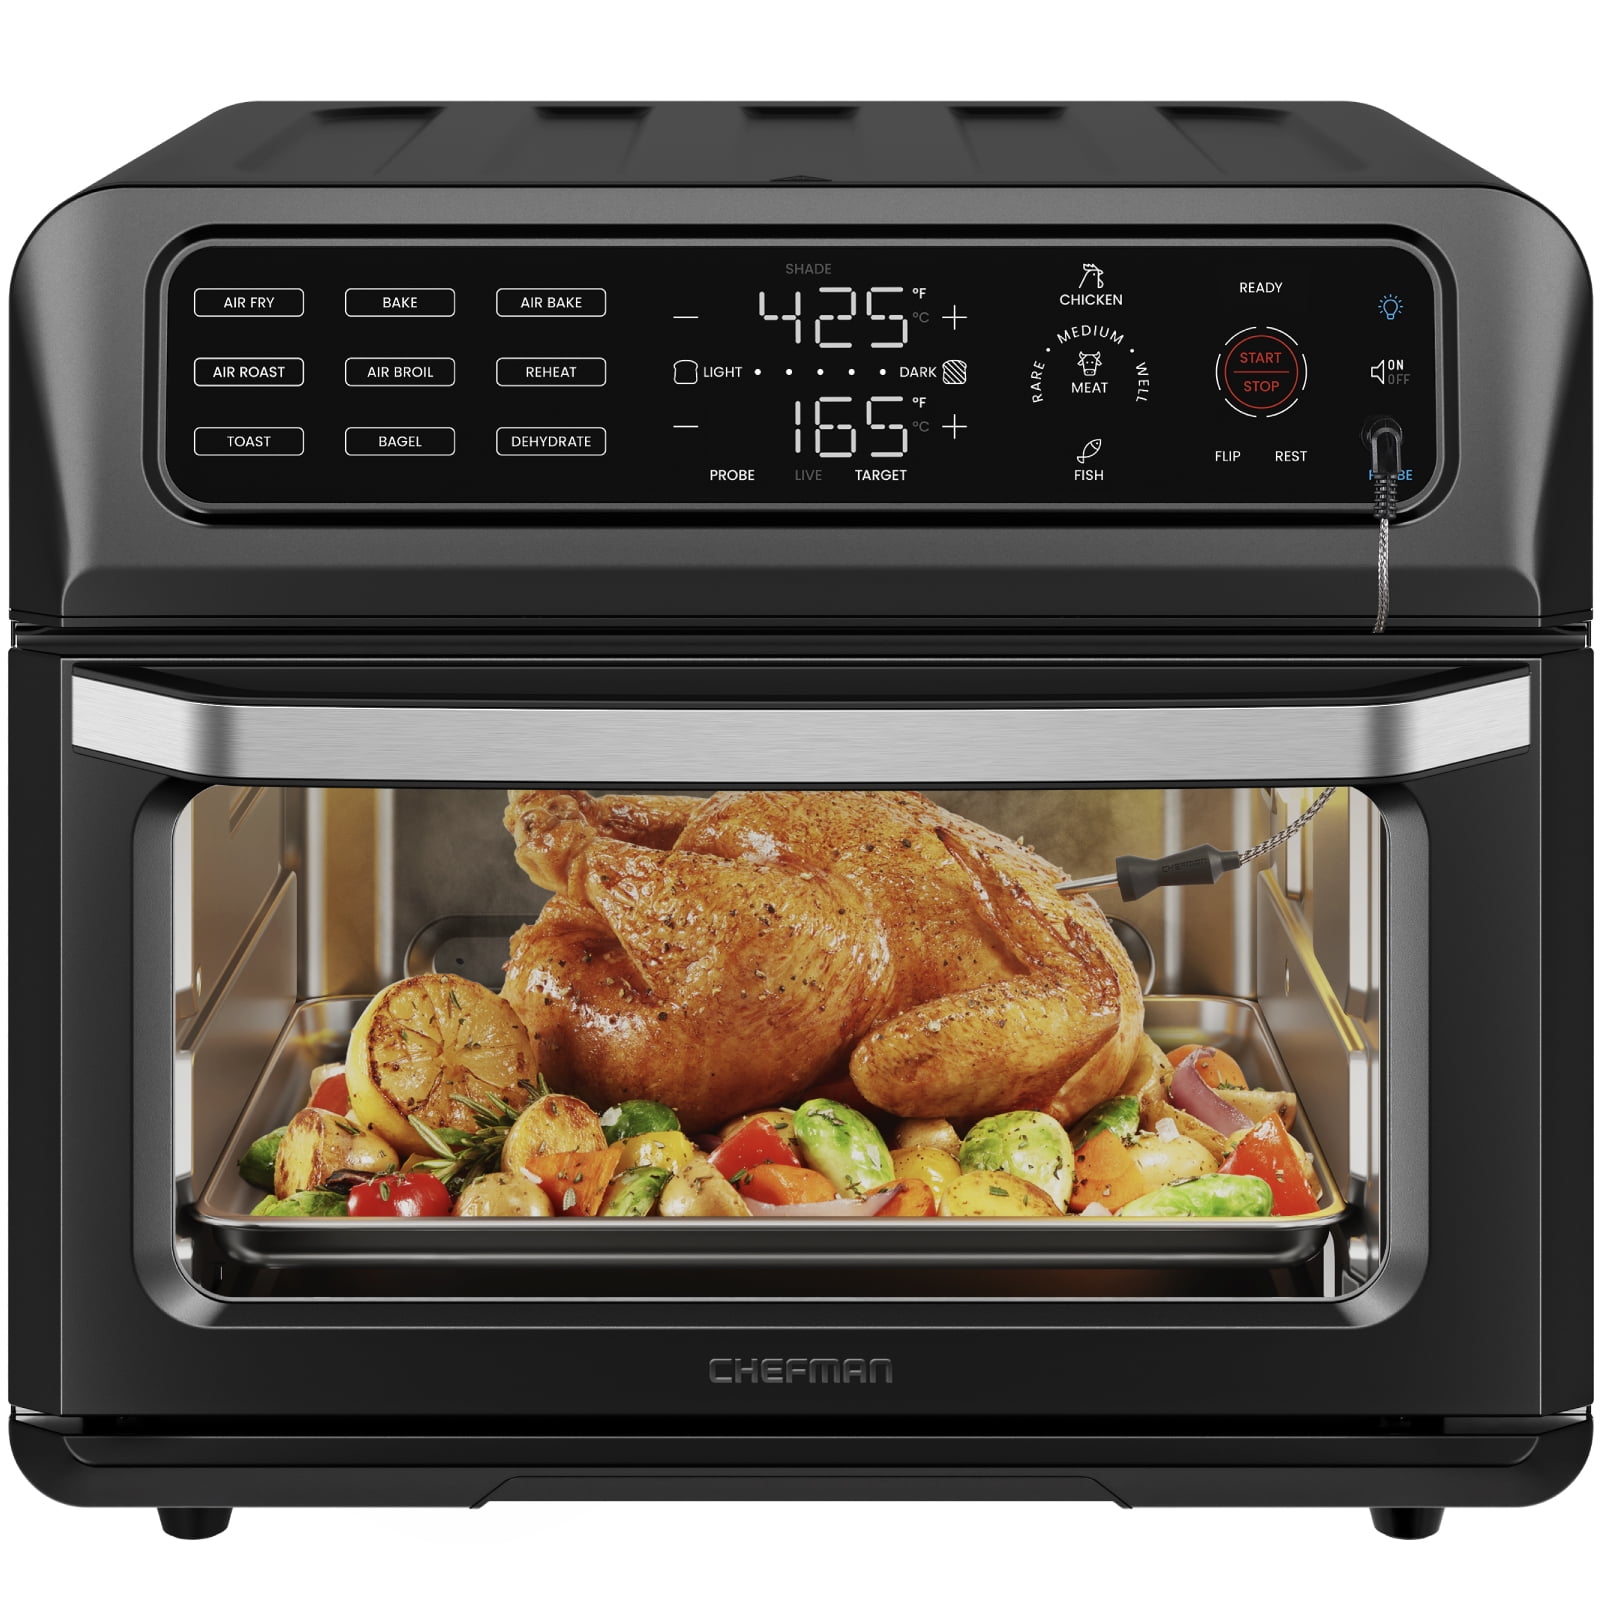 Lumme Air Fryer, Toaster Oven, and Dehydrator Combo, 1 unit - Kroger